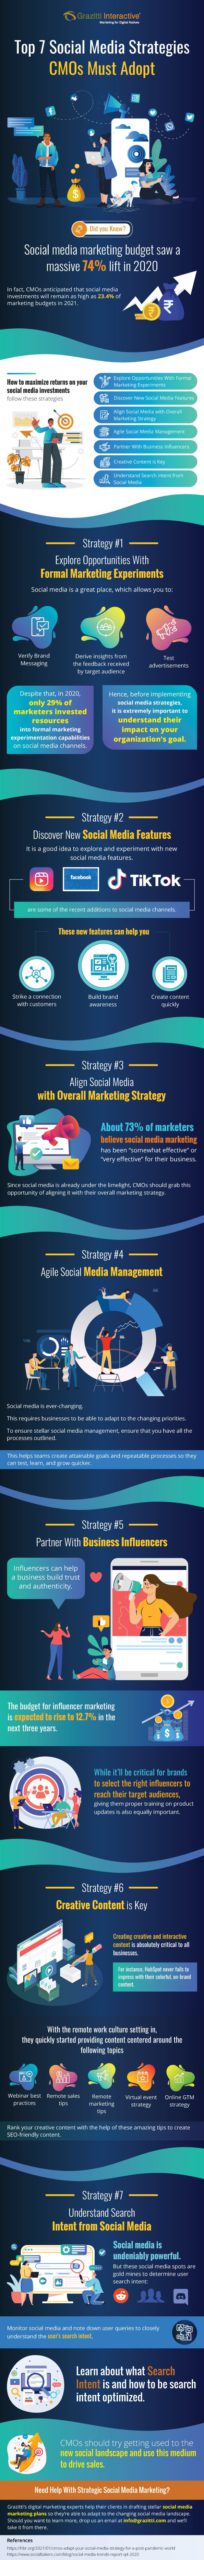 top 7 social media strategies cmos must adopt in 2022 infographic scaled 1